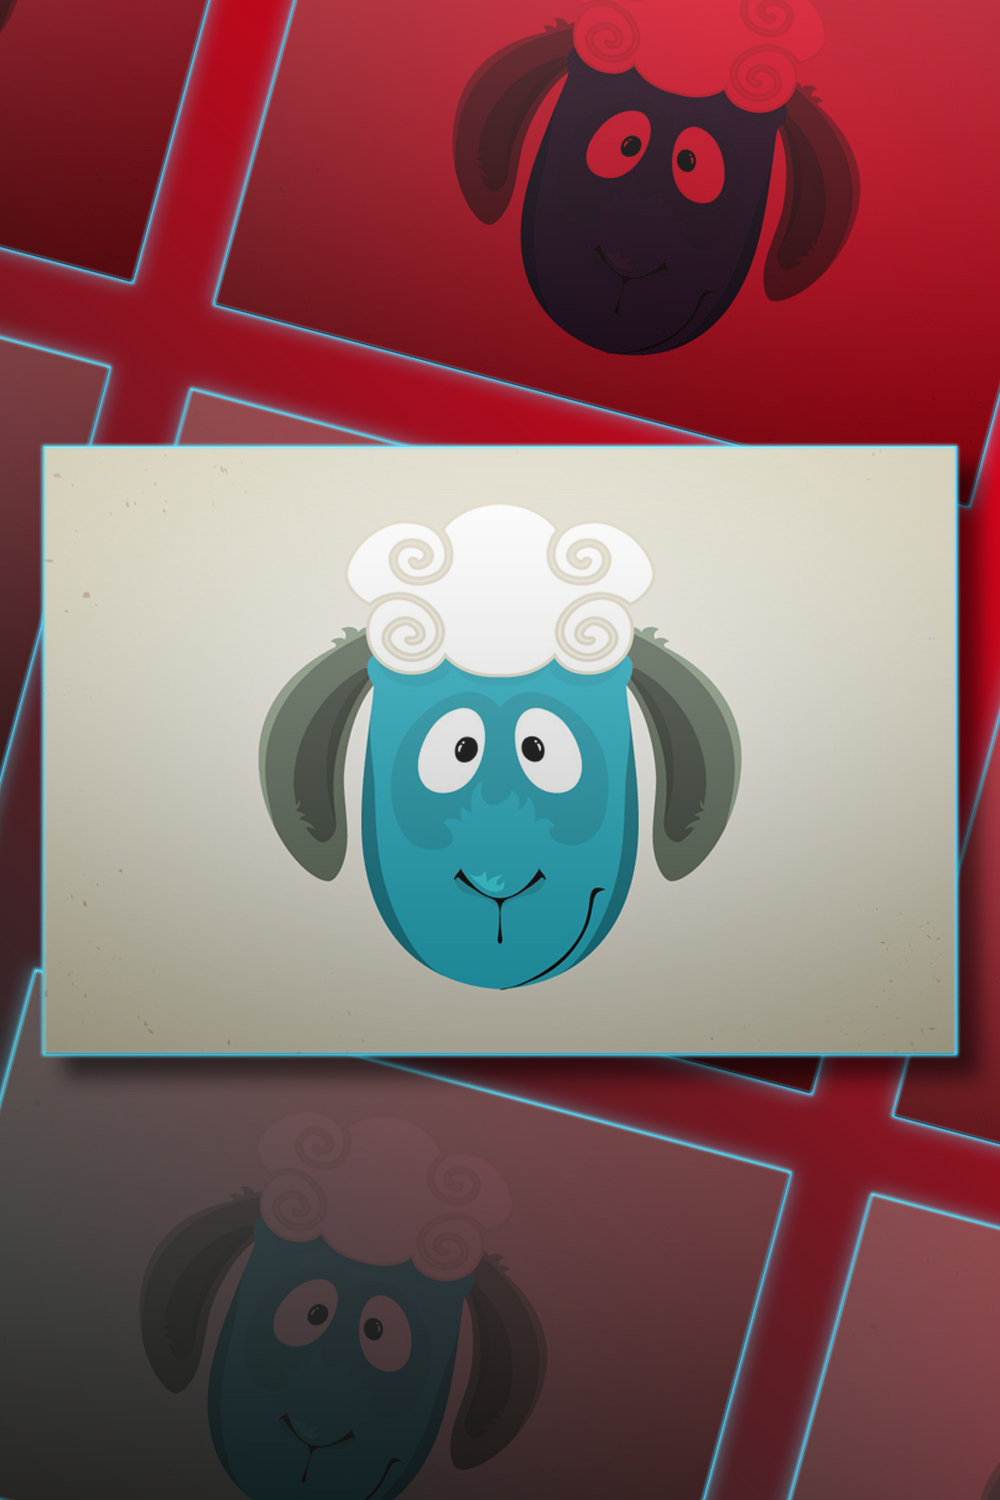 Head Of The Cartoon Smiling Sheep Pinterest Cover.